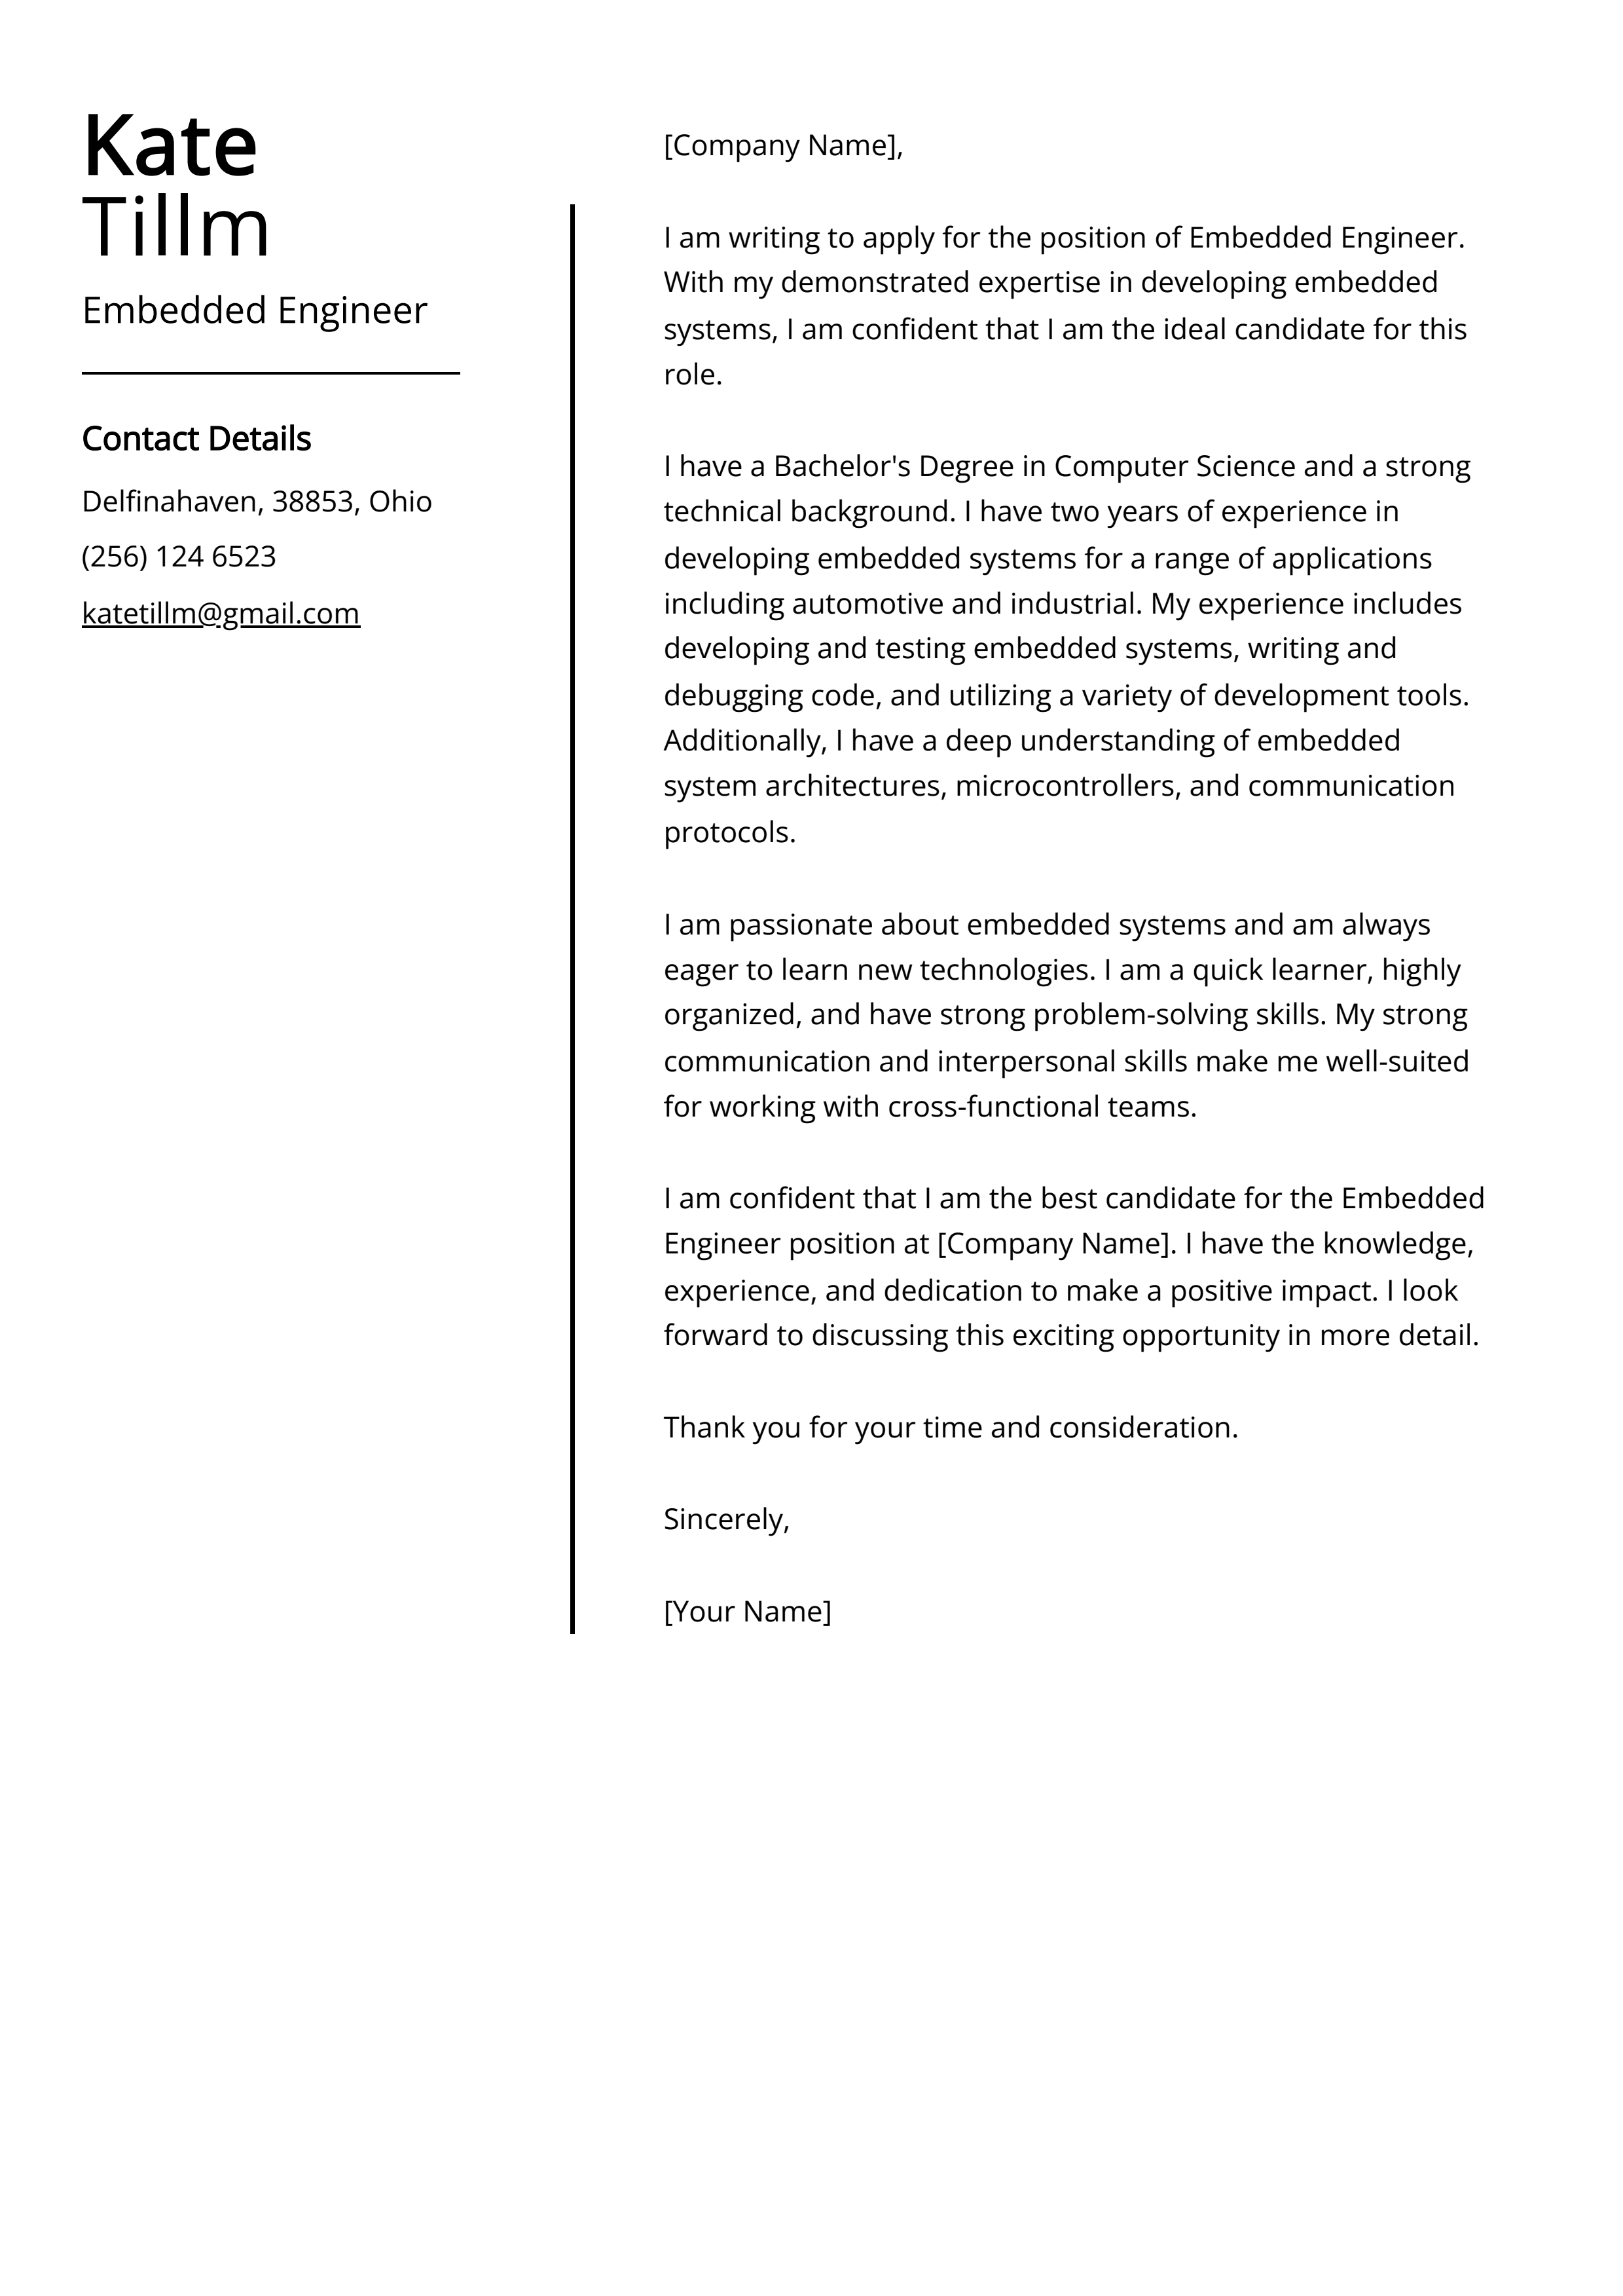 Embedded Engineer Cover Letter Example